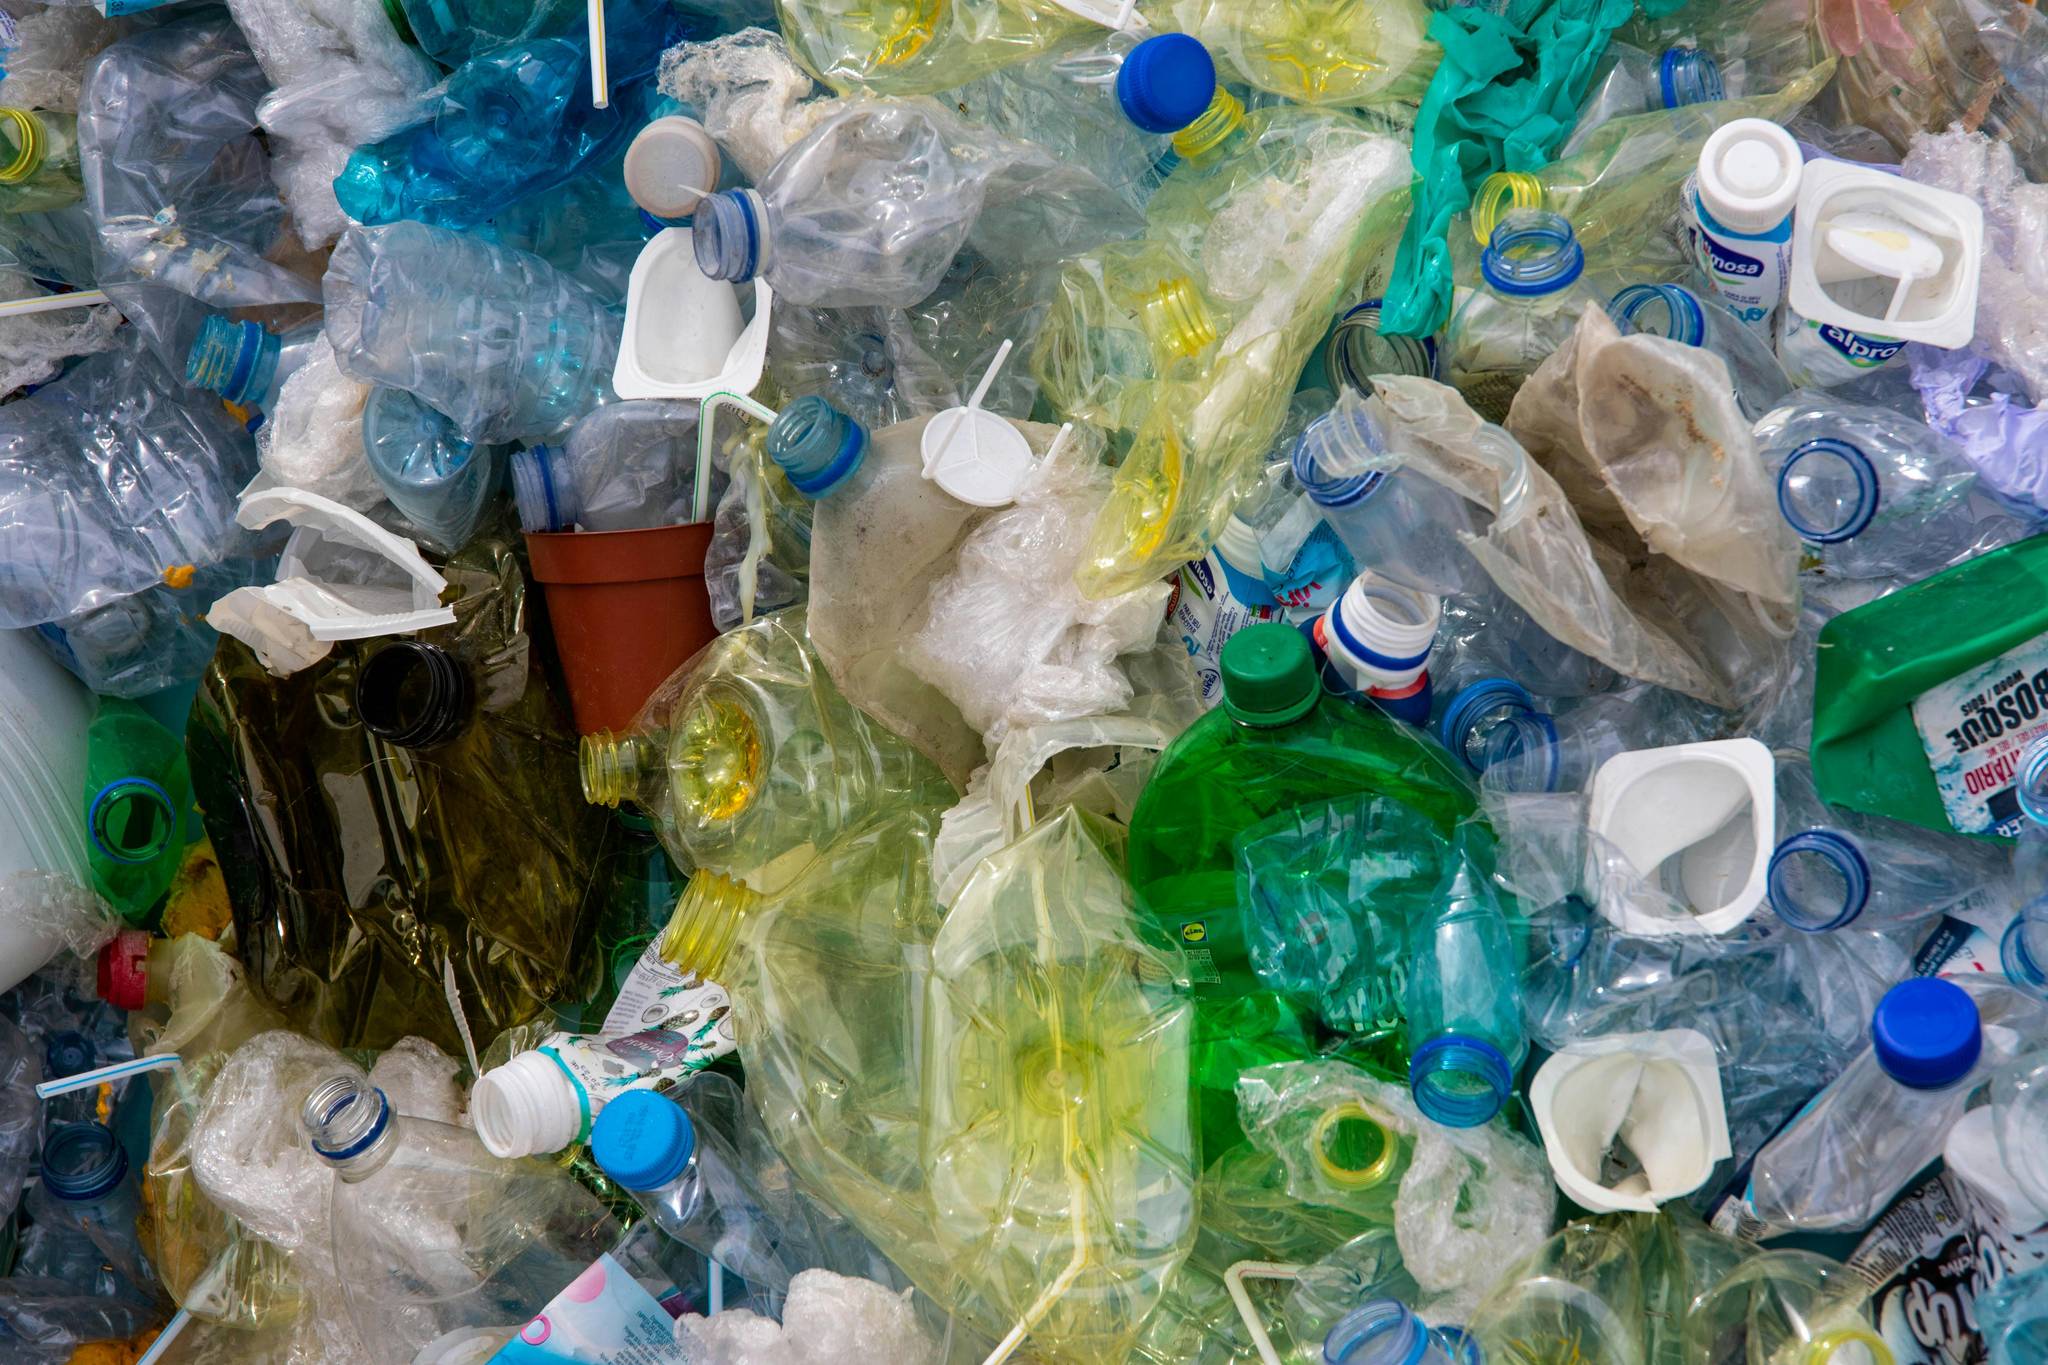 Germans are divided about the issue of plastic waste